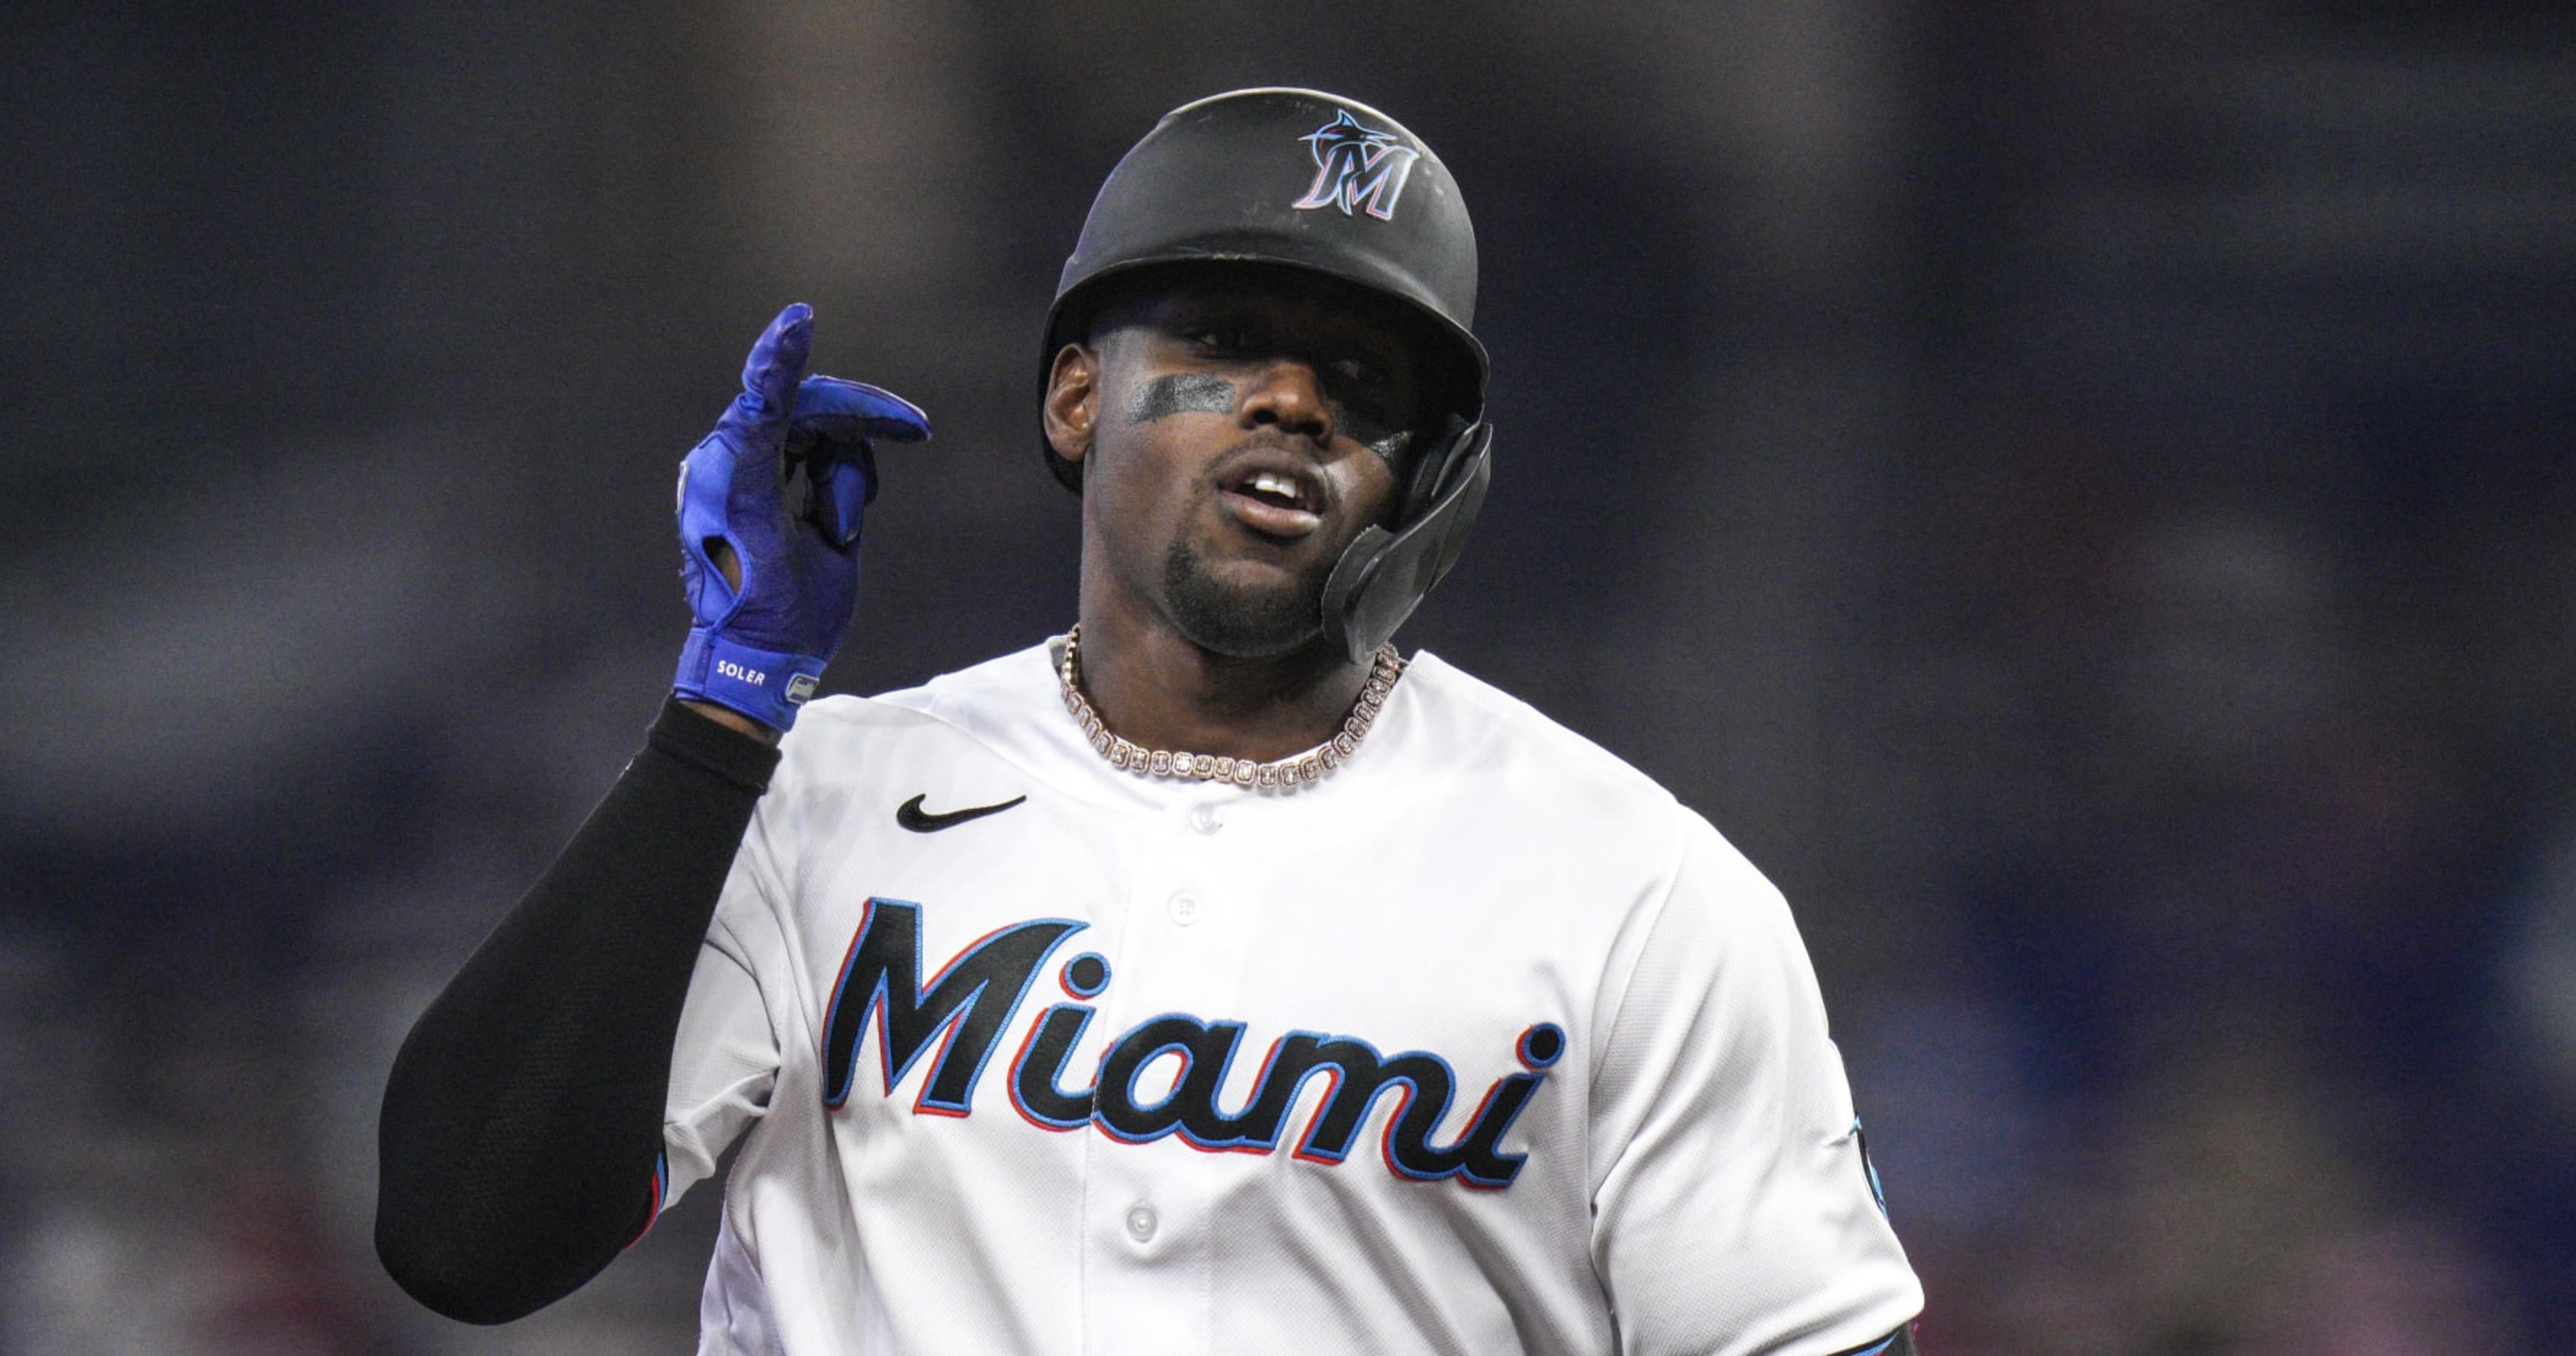 Jorge Soler out to extend embarrassing Miami Marlins streak